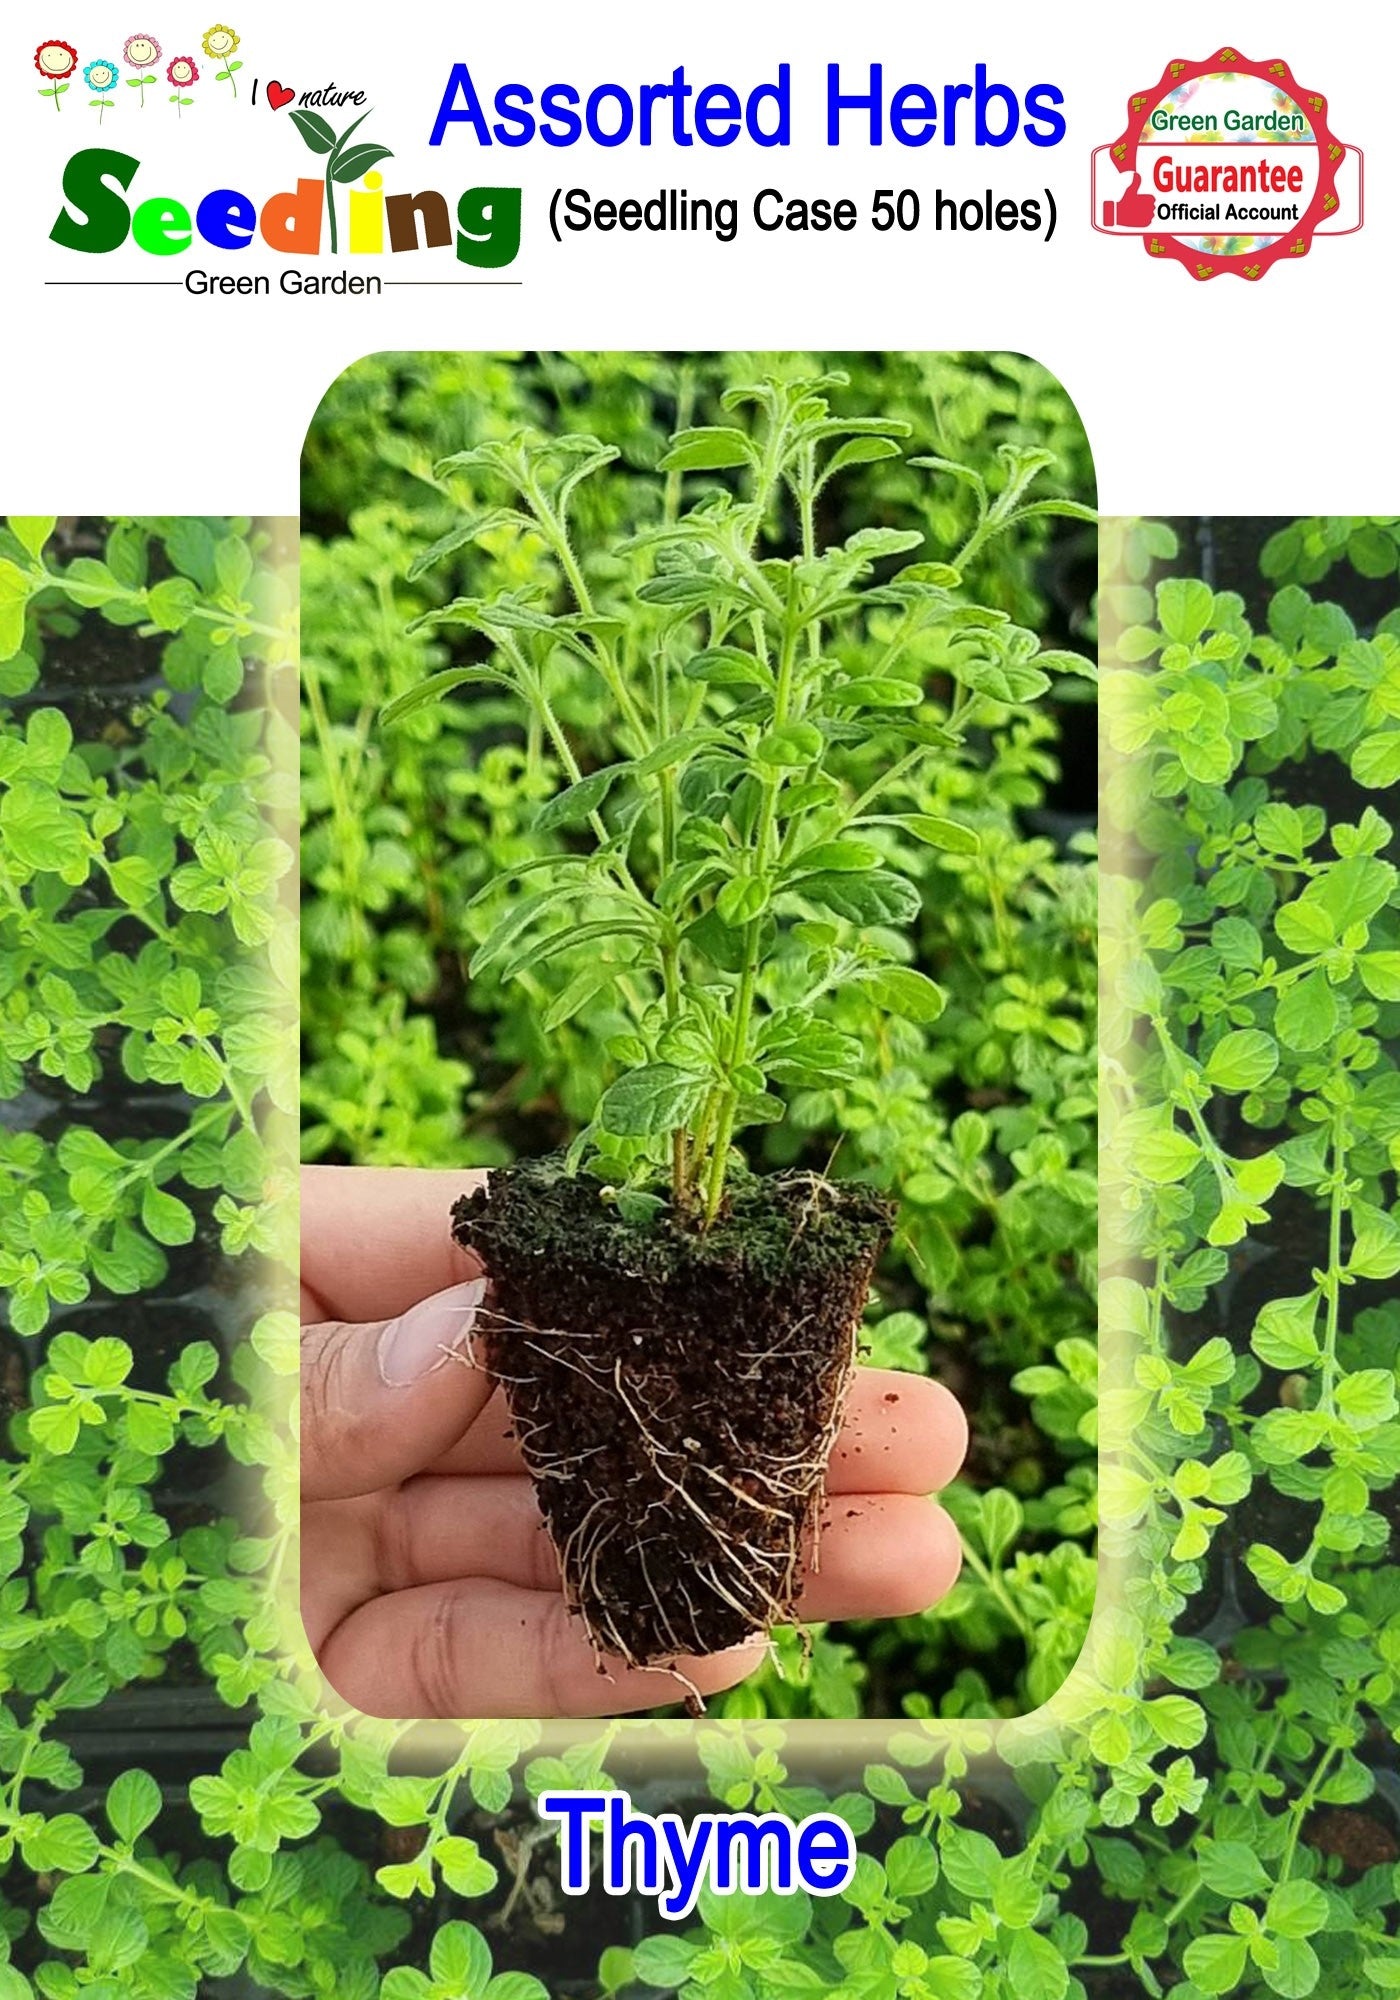 Assorted Potted Herbs in 50 hole case